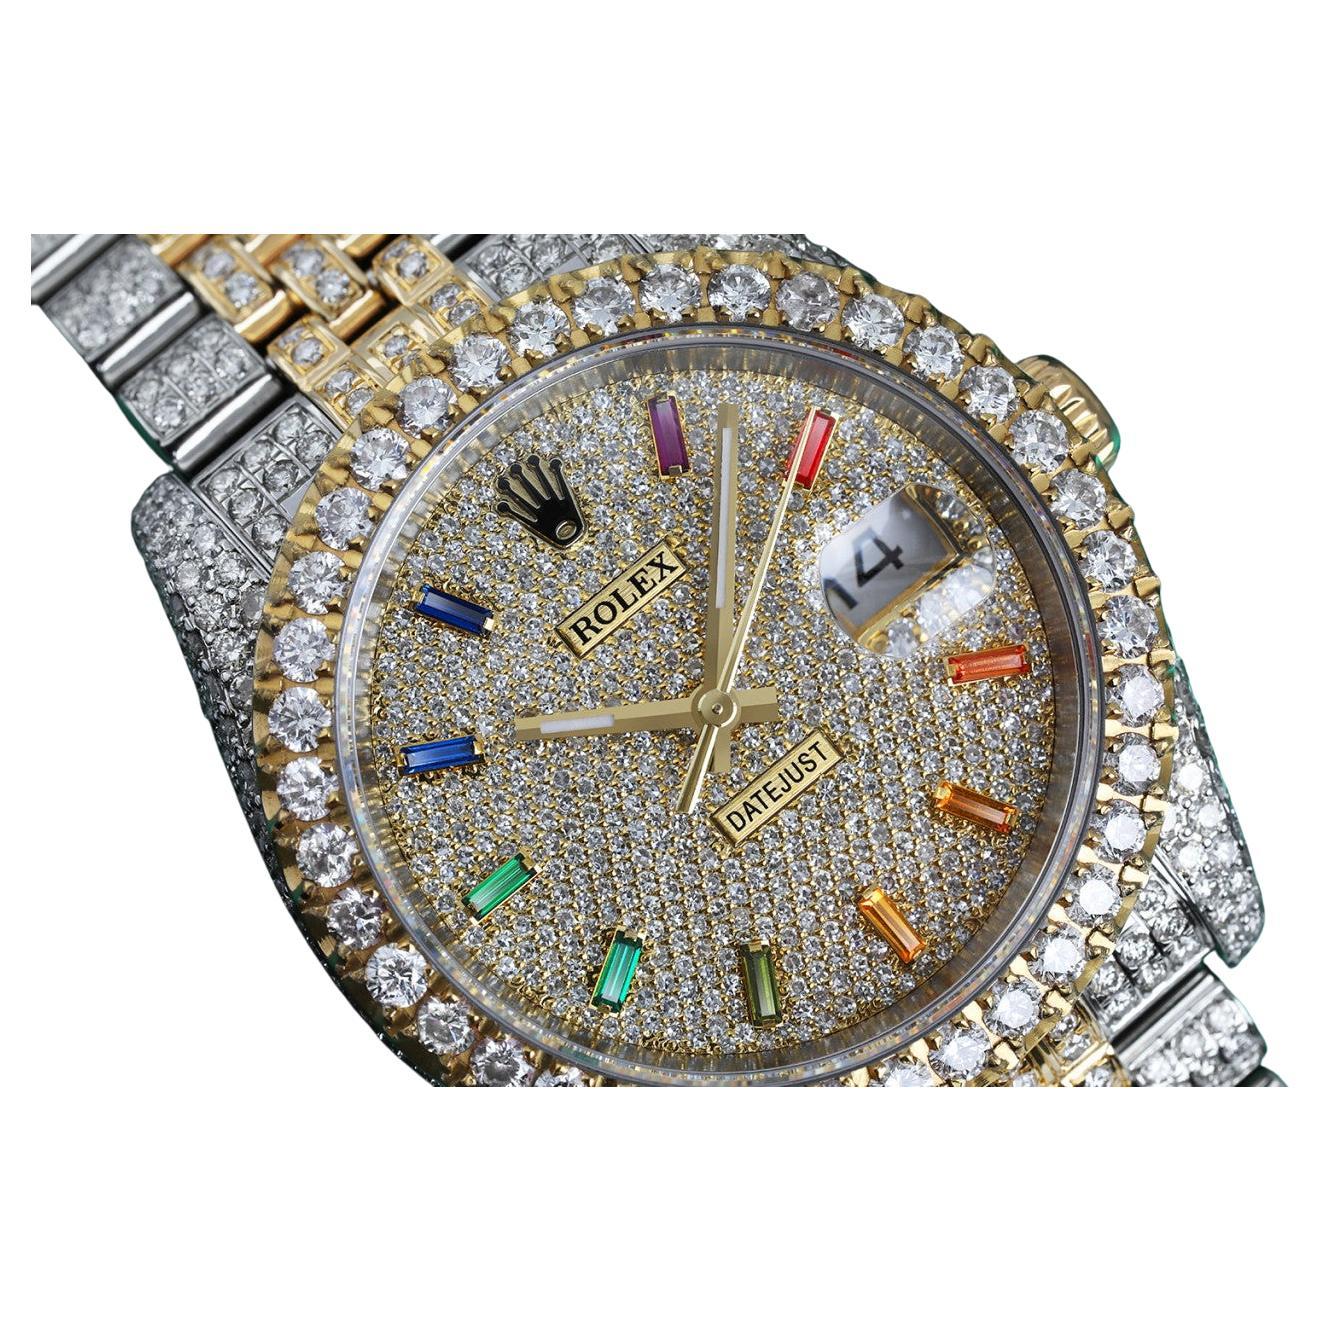 Rolex Datejus TwoTone Rainbow Index Pave Diamond Dial Fully Iced Out Watch